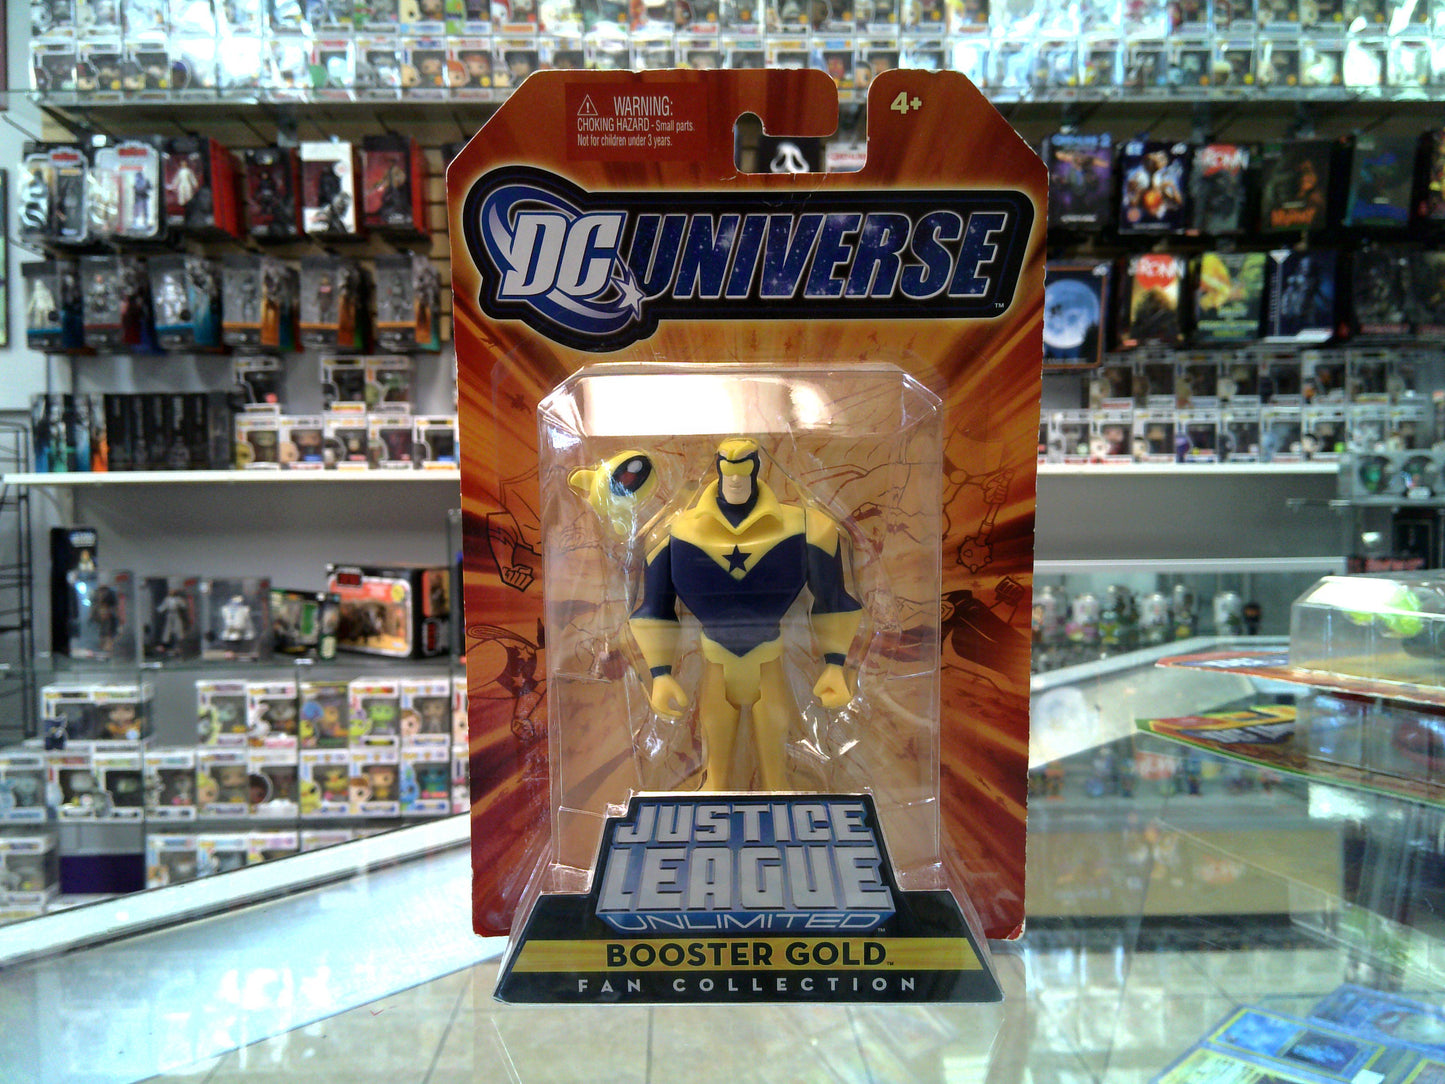 DC Super Heroes Justice League Unlimited - Booster Gold (Fan Collection)